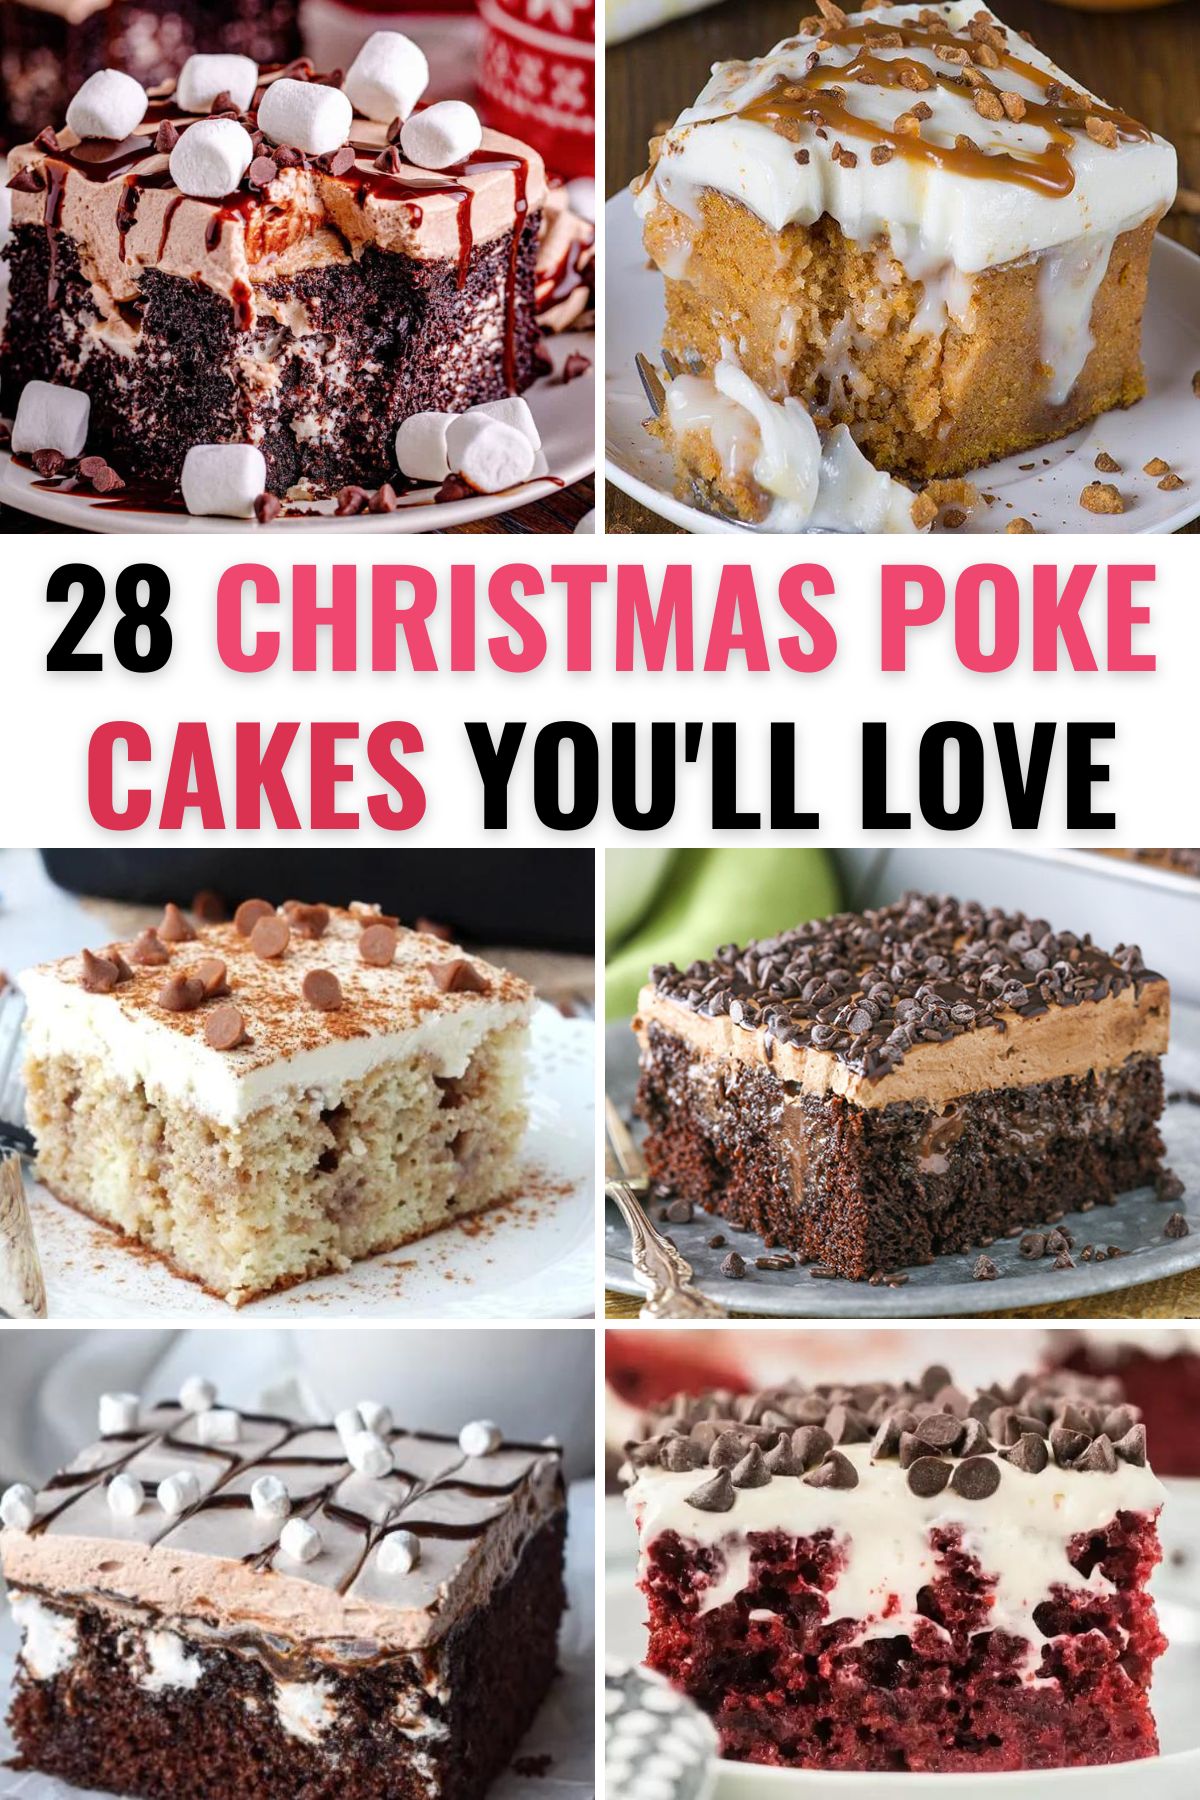 a collage of 6 different poke cakes you can eat at Christmas.